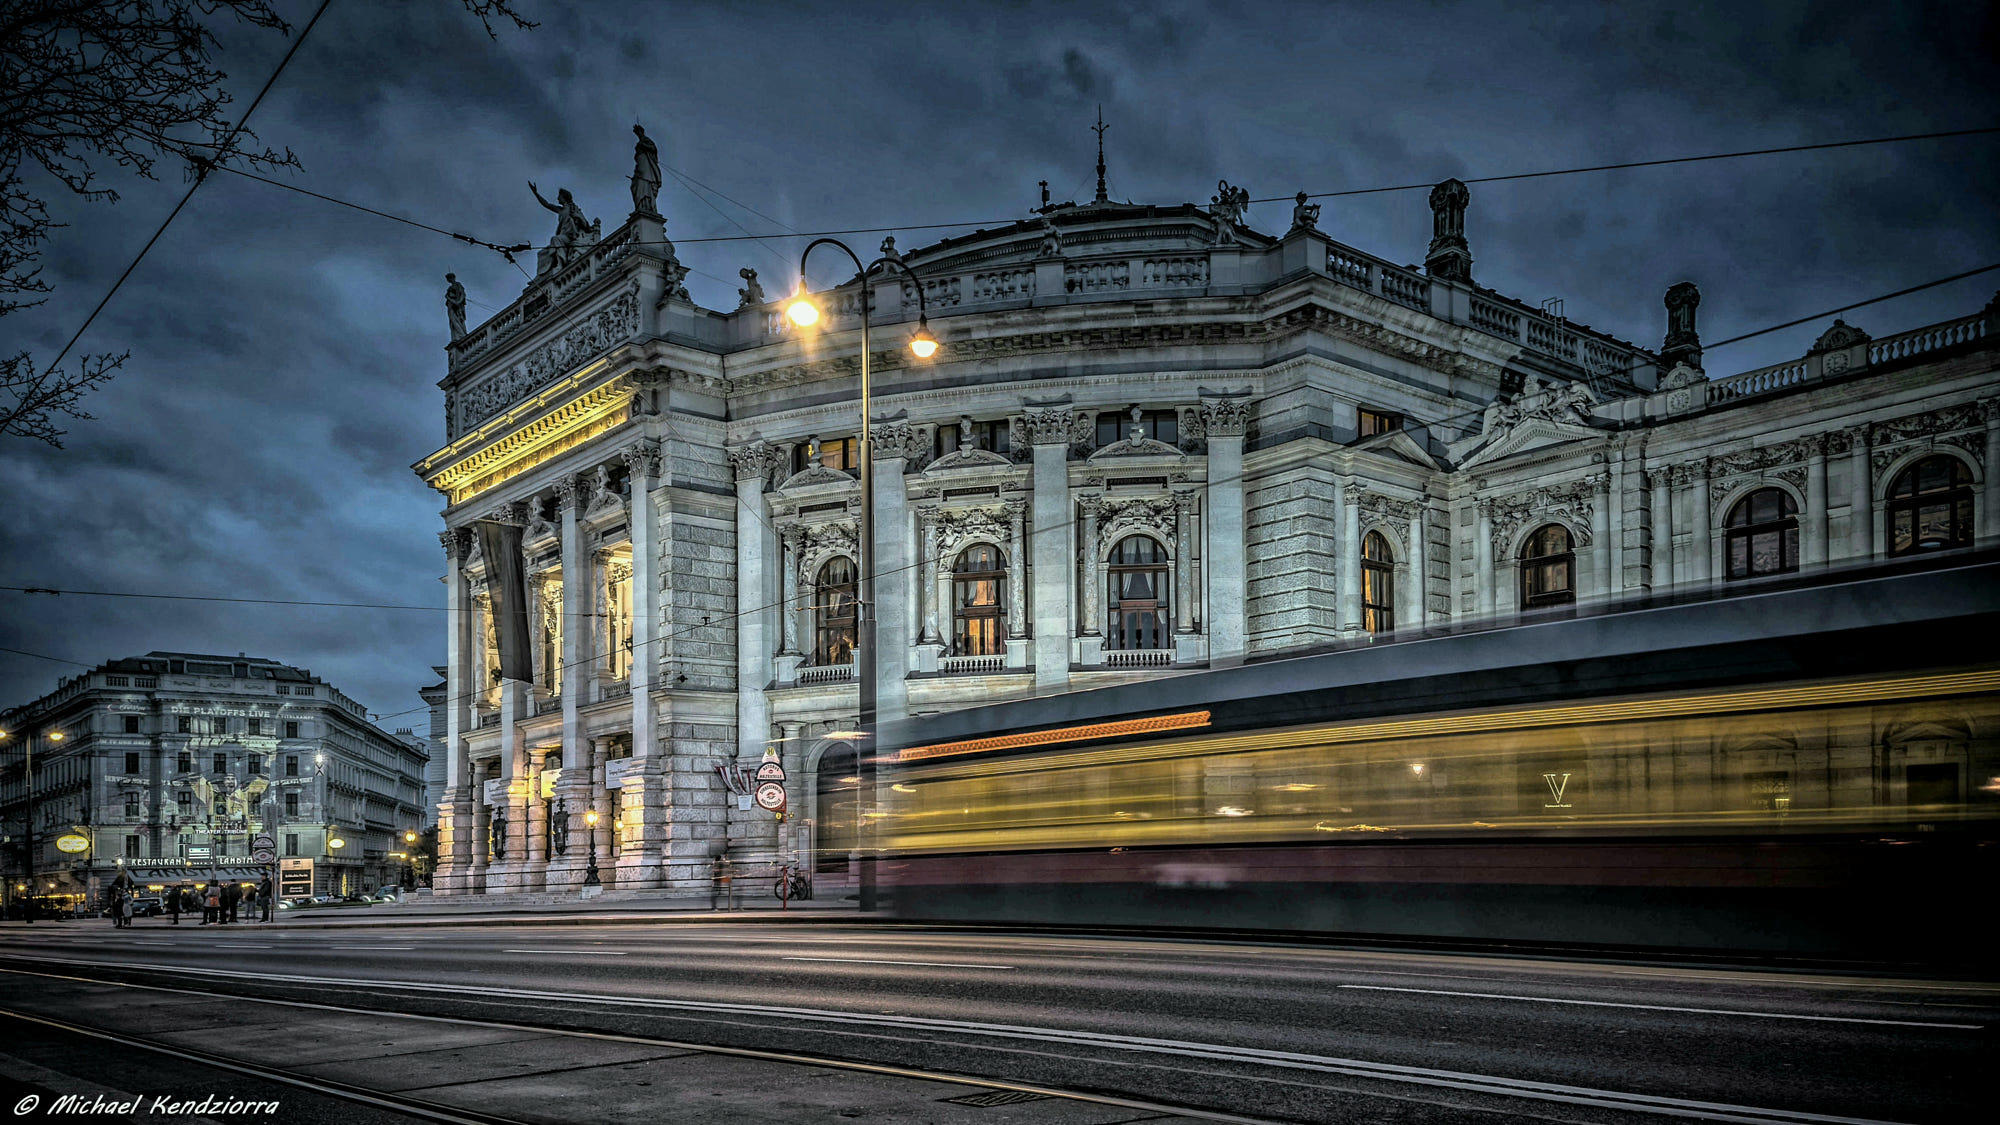 The Tram at the Burgtheater